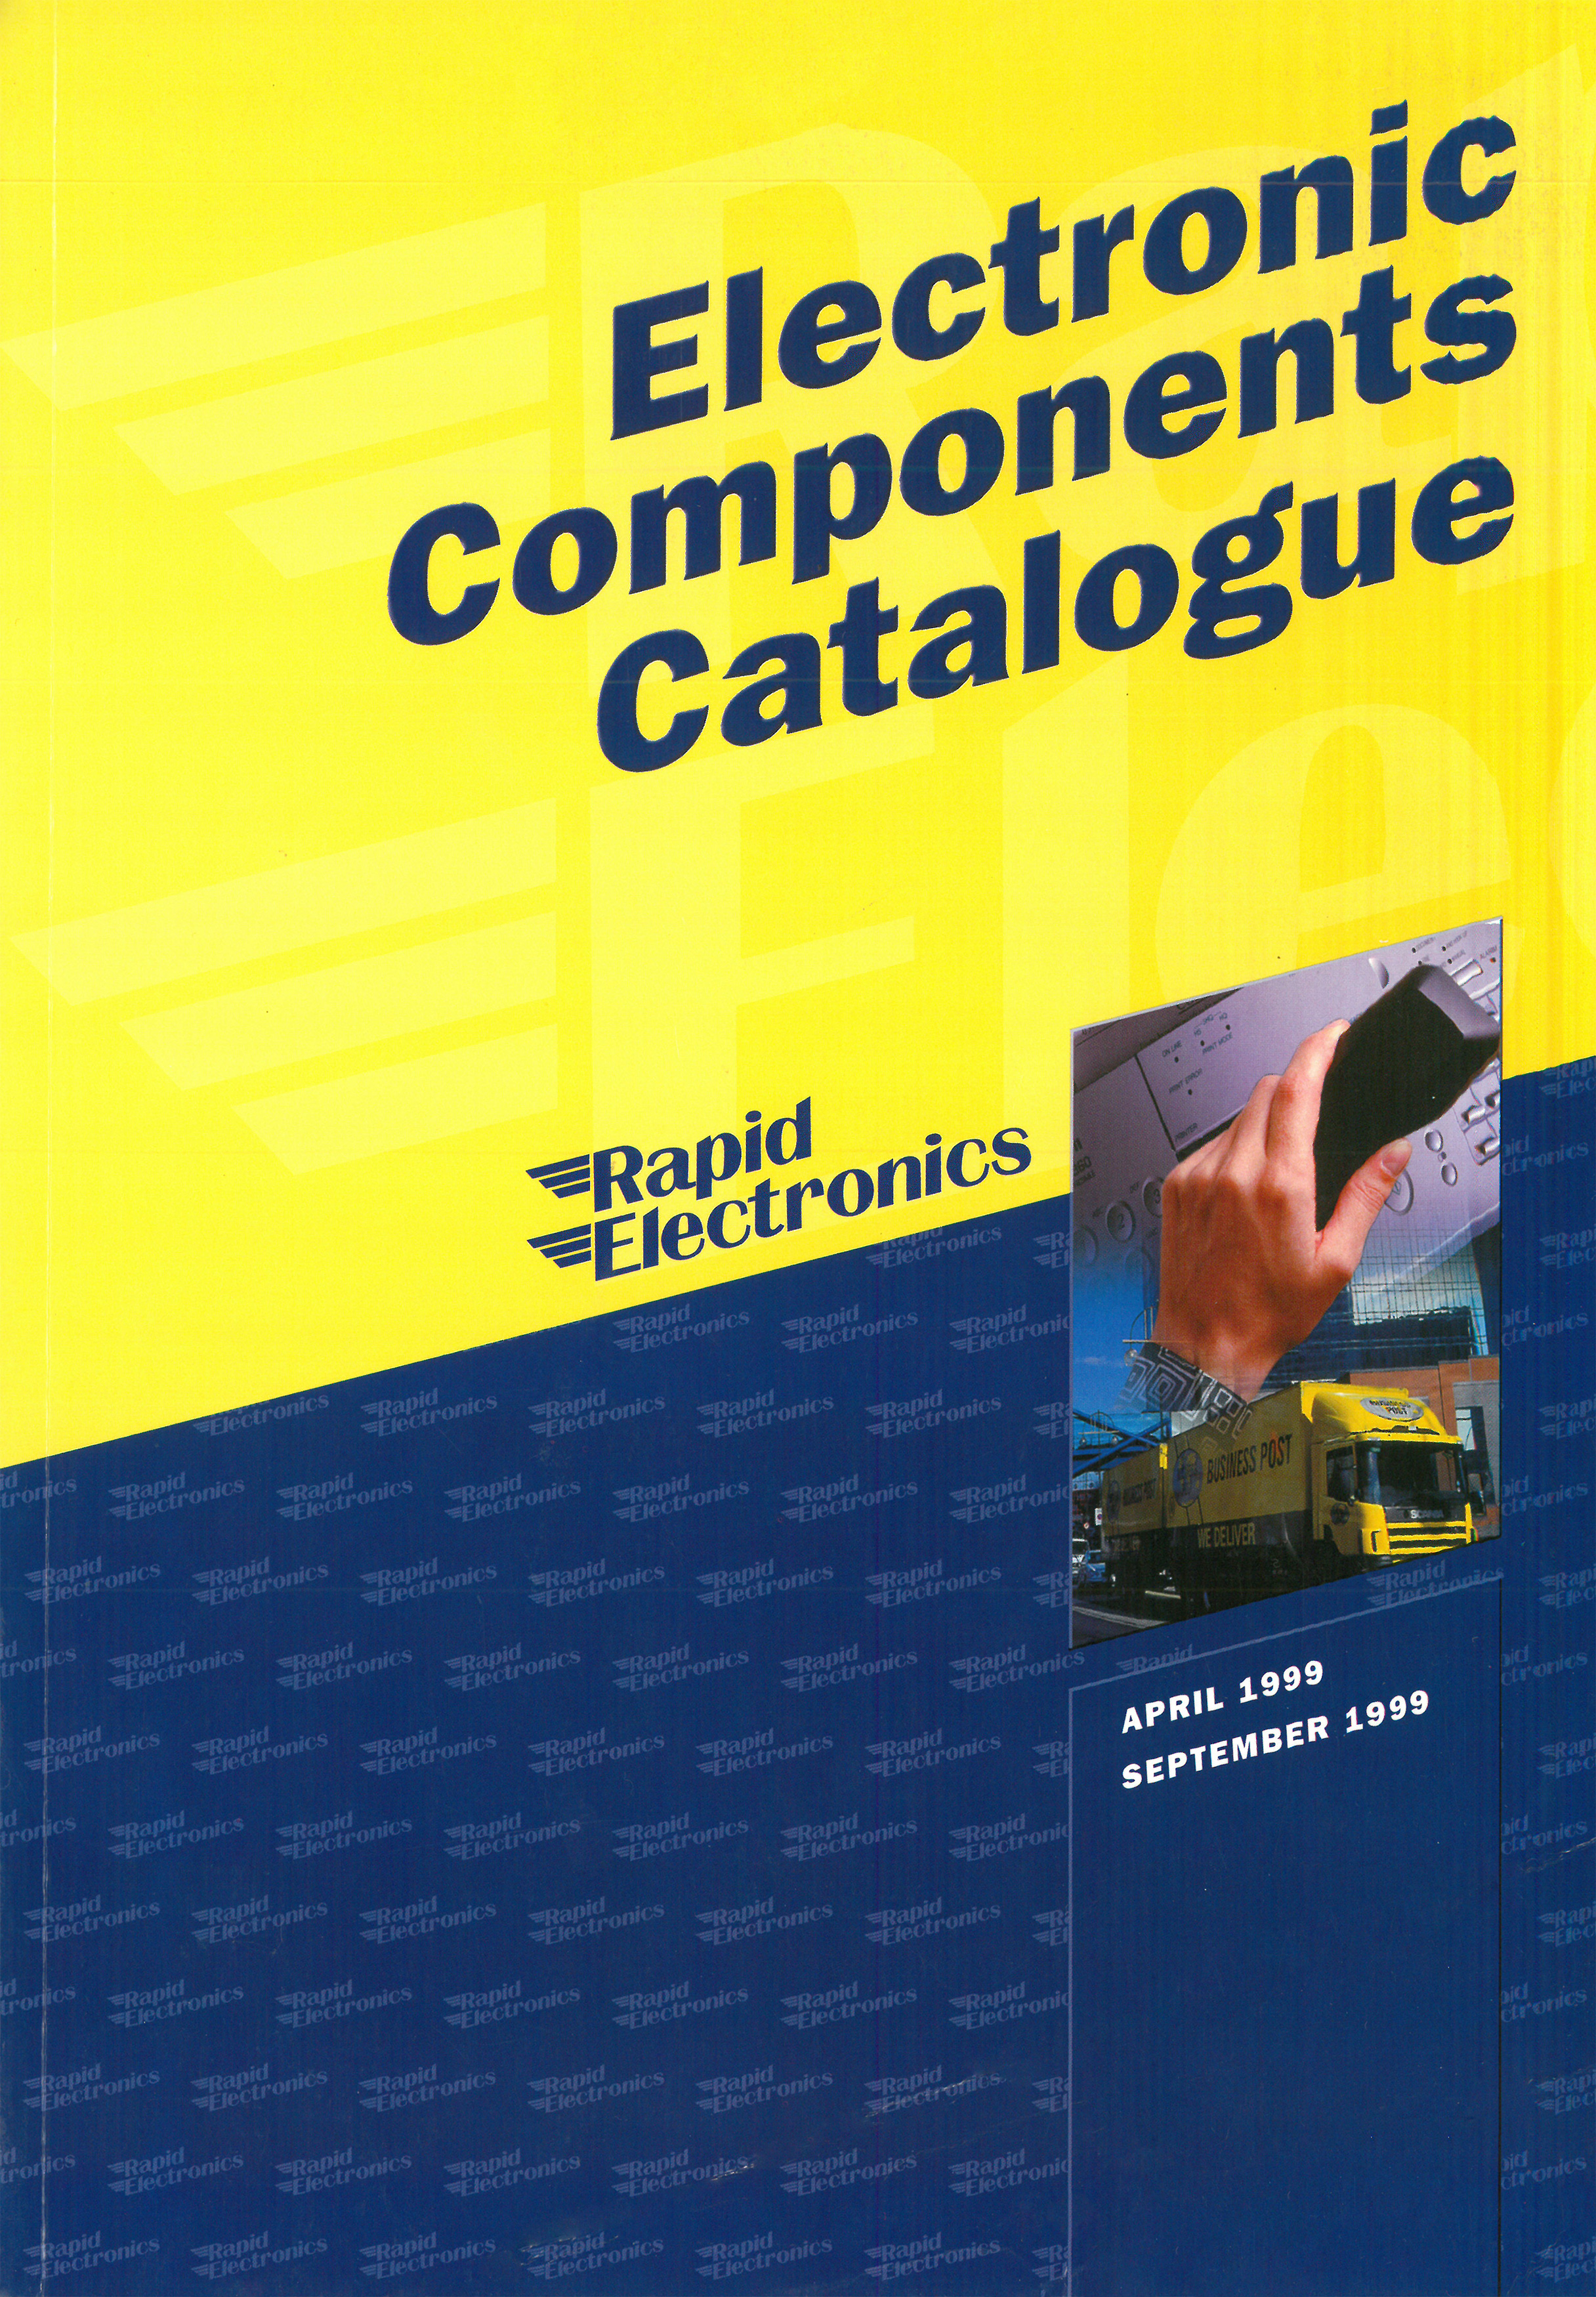 1999 Industry catalogue cover